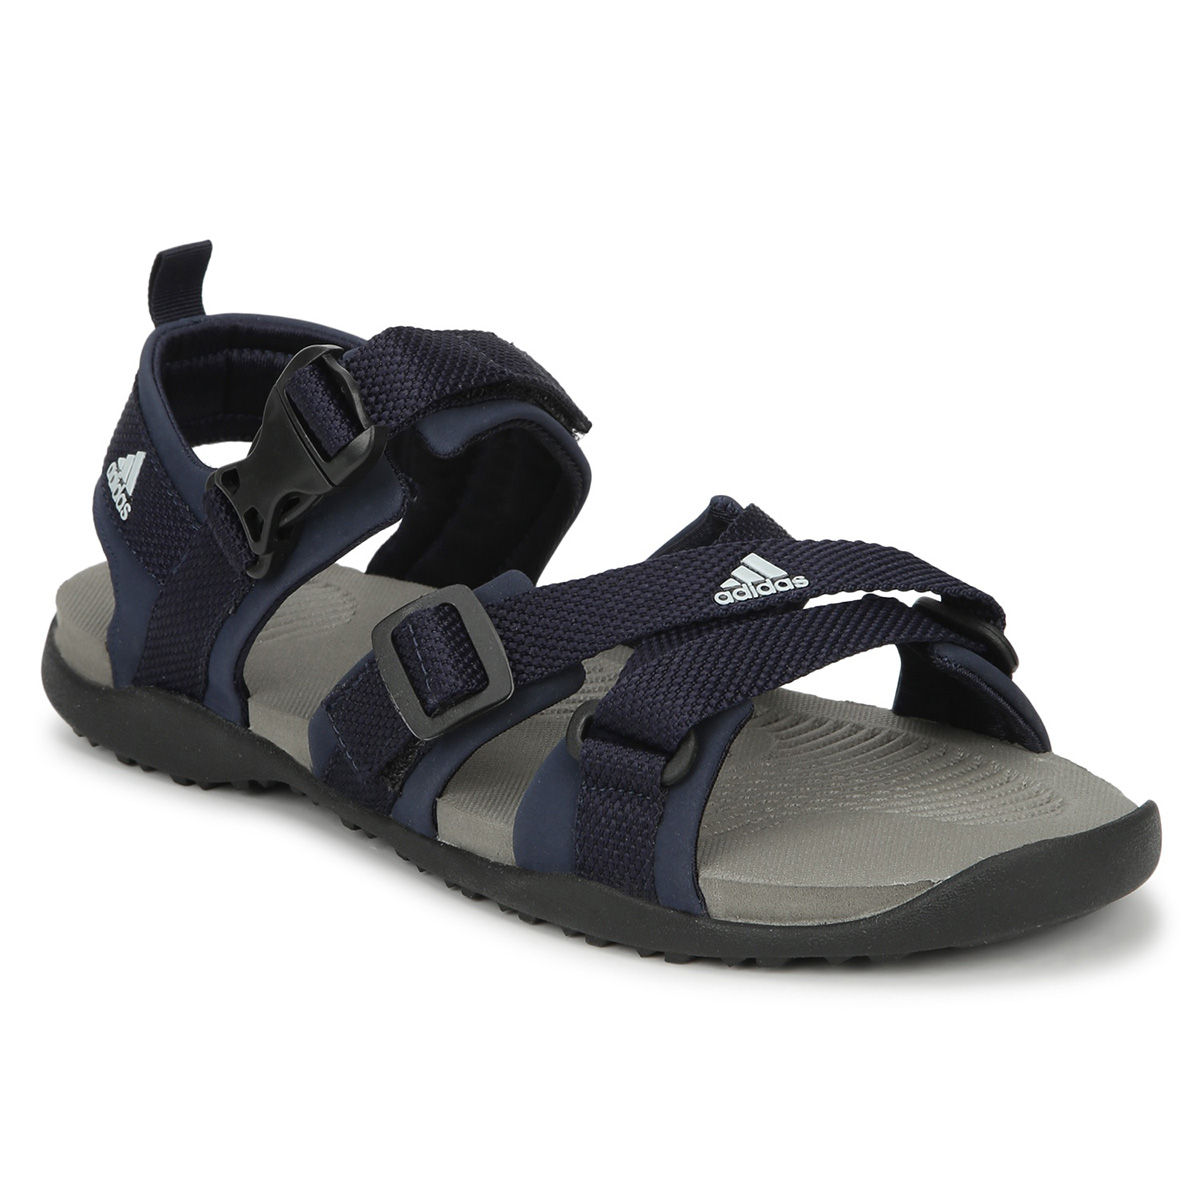 Buy Adidas Gladi II Blue Floater Sandals for Men at Best Price @ Tata CLiQ